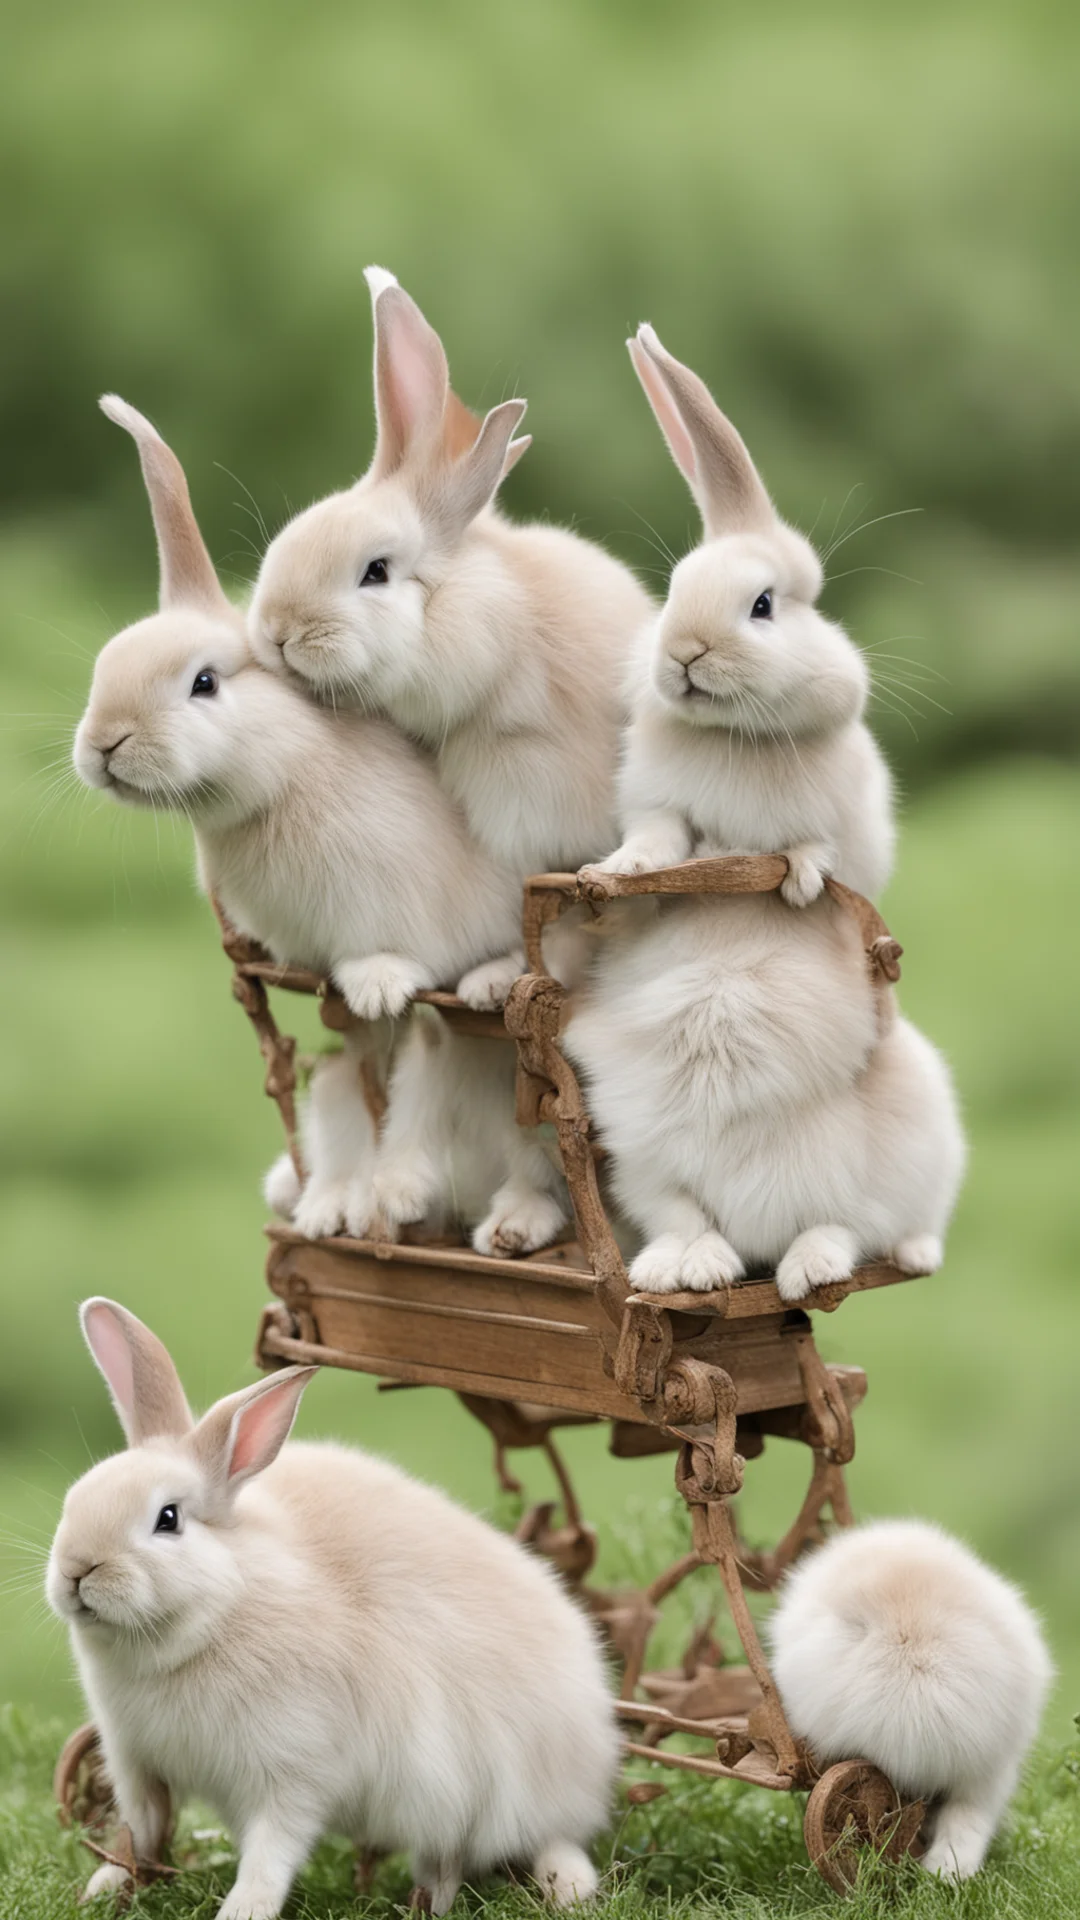 aibunnies pull carriage amazing awesome portrait 2 tall